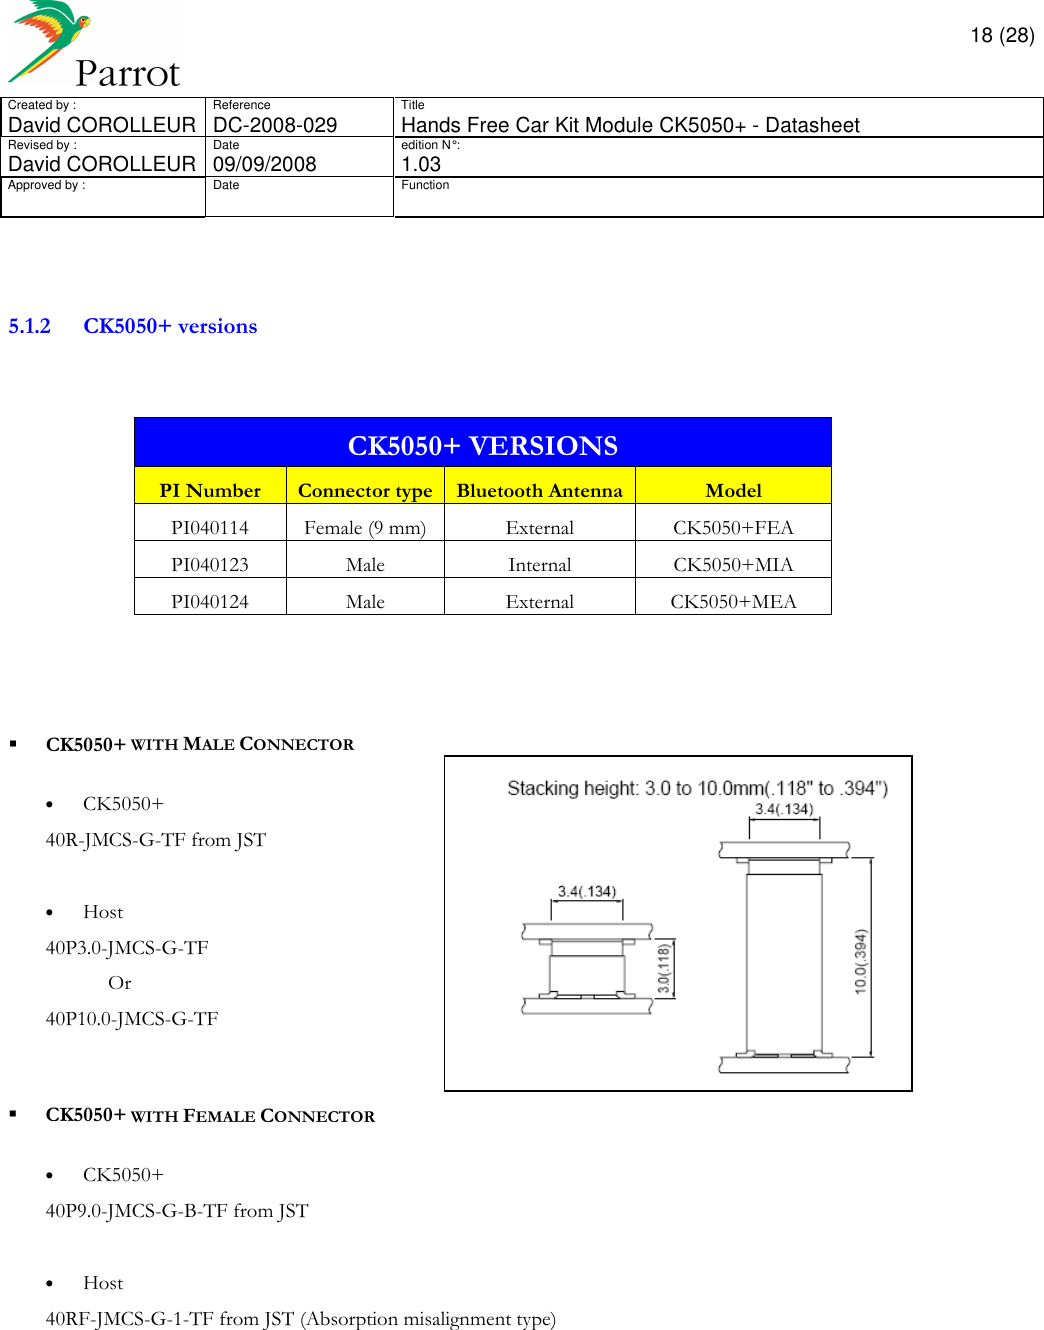       18 (28) Created by :  Reference  Title David COROLLEUR  DC-2008-029  Hands Free Car Kit Module CK5050+ - Datasheet  Revised by :  Date  edition N° :  David COROLLEUR 09/09/2008   1.03 Approved by :  Date  Function                   5.1.2 CK5050+ versions     CK5050+ VERSIONS  PI Number  Connector type Bluetooth Antenna Model PI040114  Female (9 mm)  External  CK5050+FEA PI040123  Male  Internal  CK5050+MIA PI040124  Male  External  CK5050+MEA       CK5050+ WITH MALE CONNECTOR  • CK5050+ 40R-JMCS-G-TF from JST  • Host 40P3.0-JMCS-G-TF        Or 40P10.0-JMCS-G-TF    CK5050+ WITH FEMALE CONNECTOR  • CK5050+ 40P9.0-JMCS-G-B-TF from JST  • Host 40RF-JMCS-G-1-TF from JST (Absorption misalignment type)   